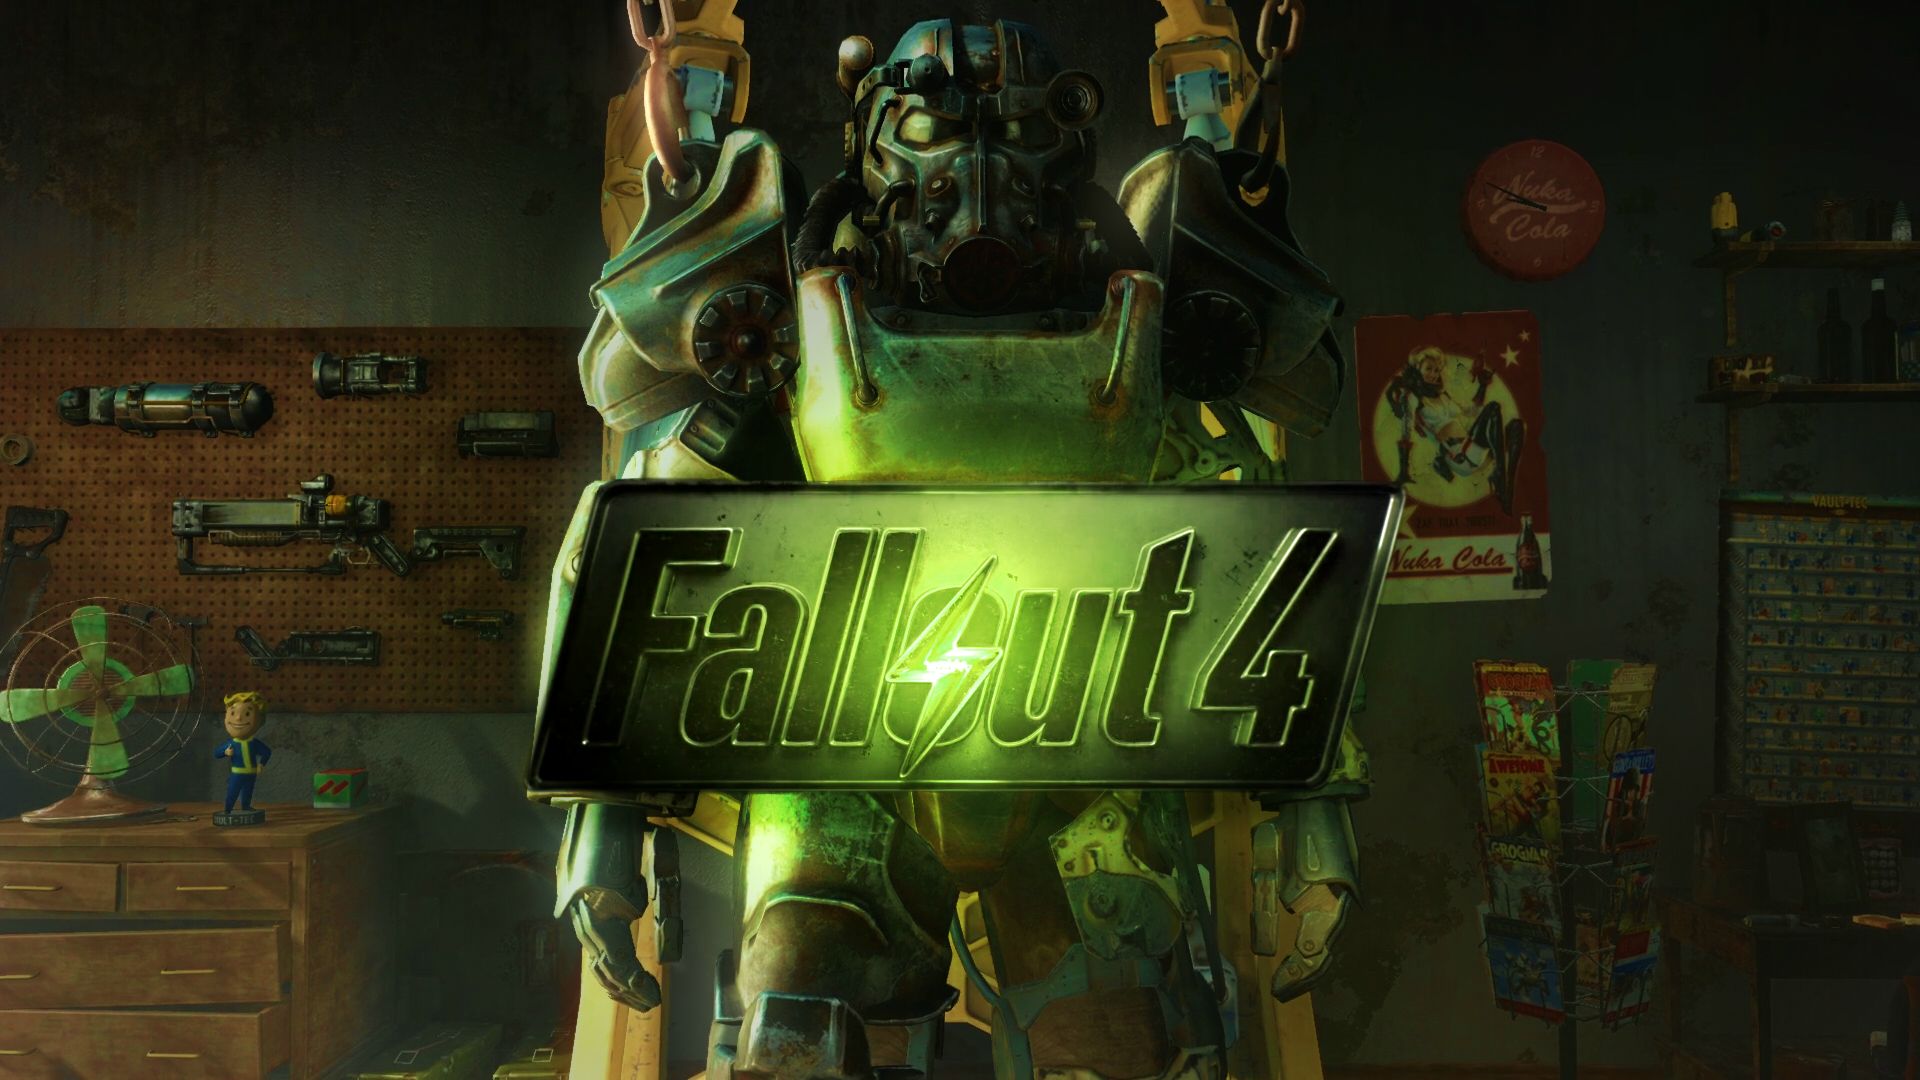 power armor (fallout), video game, fallout 4, fallout